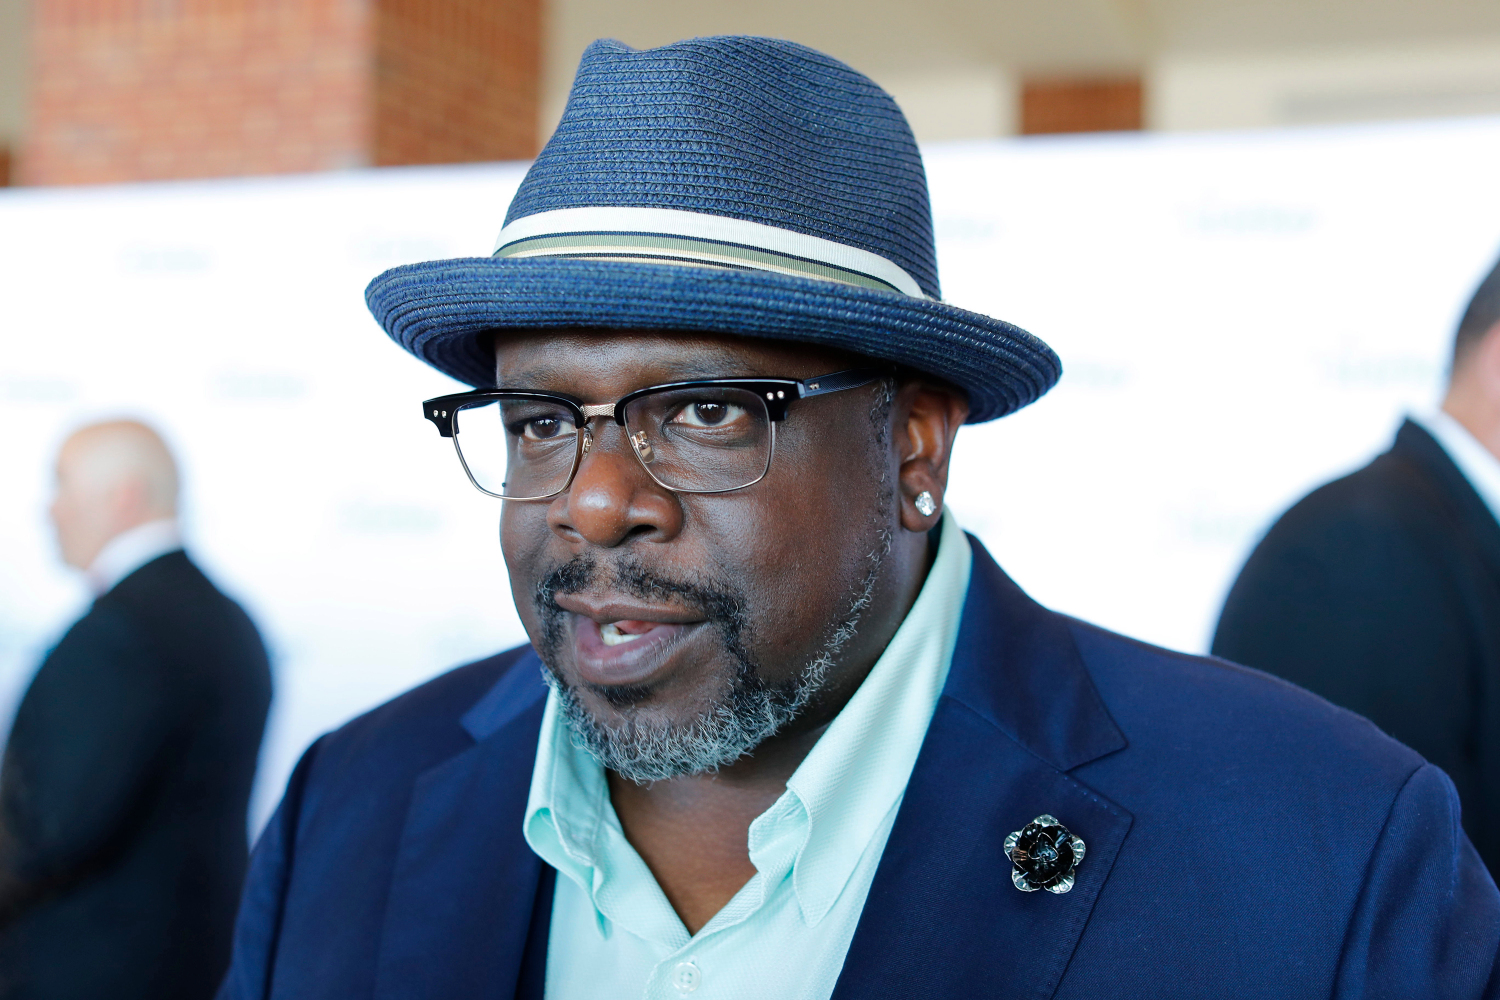 How Much Does Cedric The Entertainer Worth By Himself?